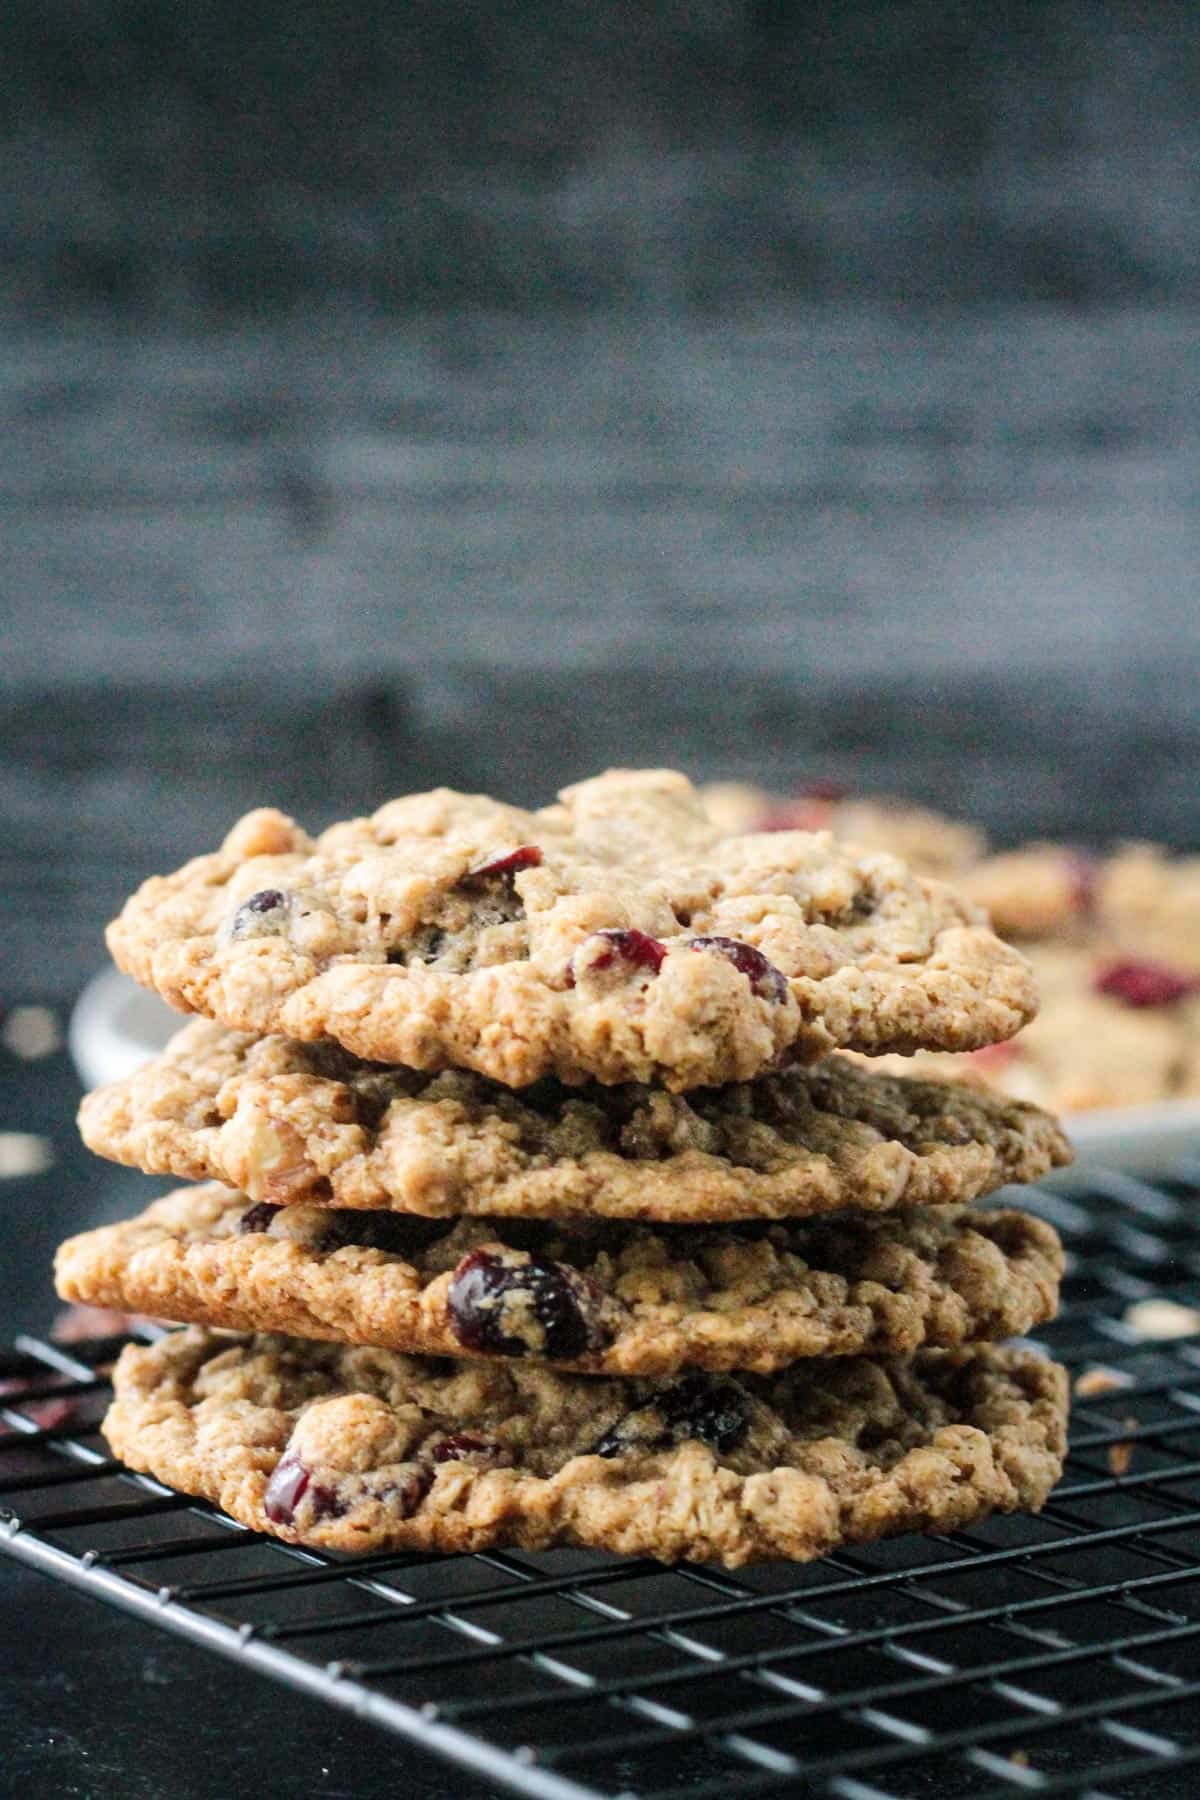 Front view of a stack of four oatmeal cookies with cranberries.